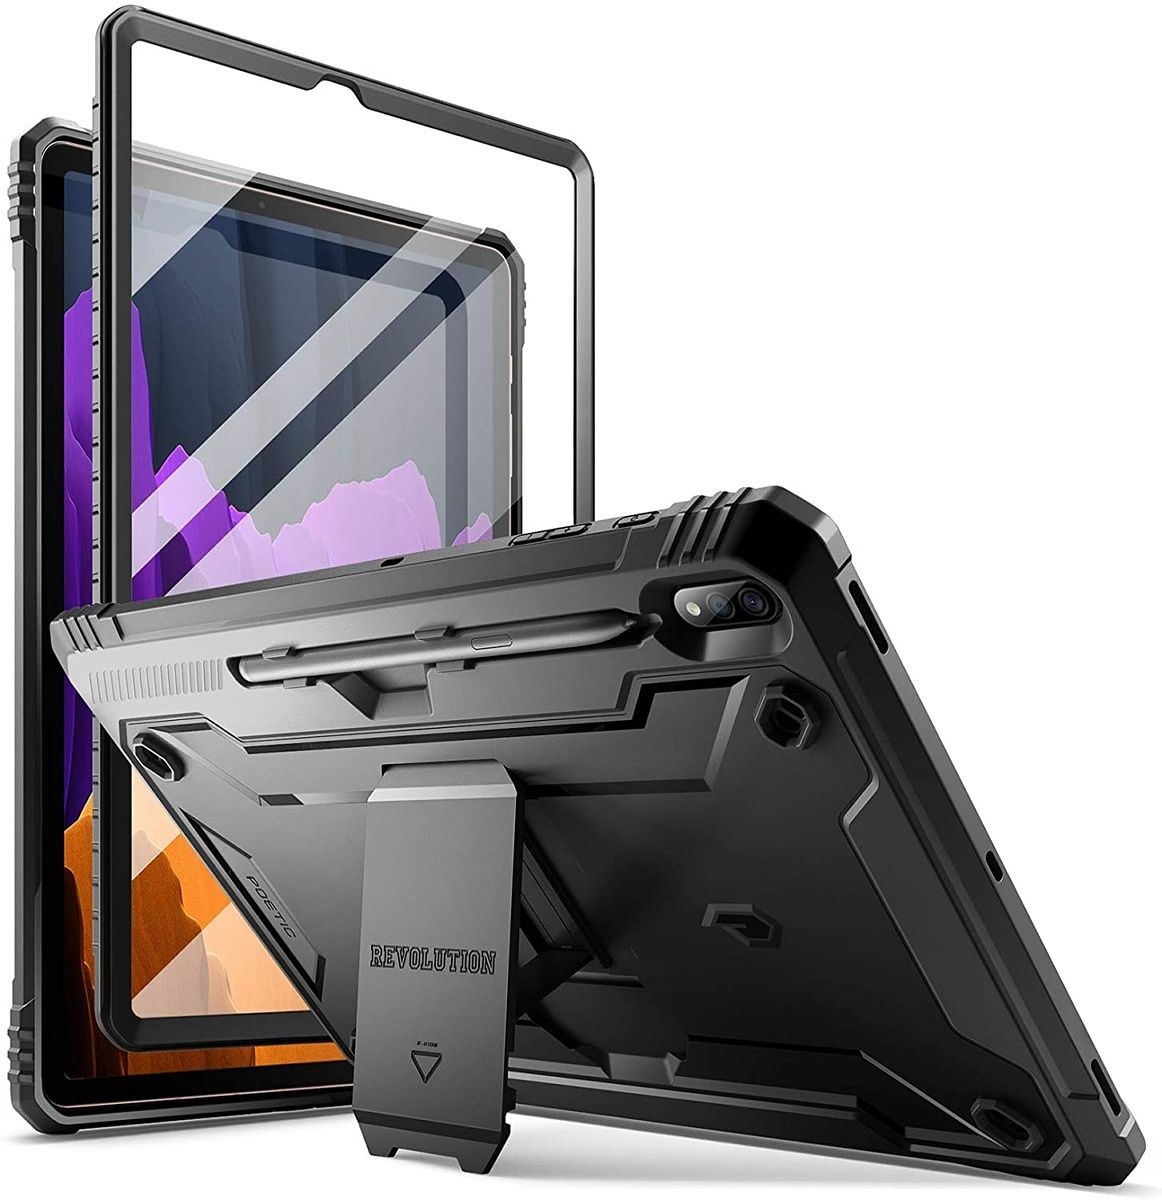 This case has an S Pen holder, a built-in screen protector, and a kickstand. It's available in three different colors to choose from.